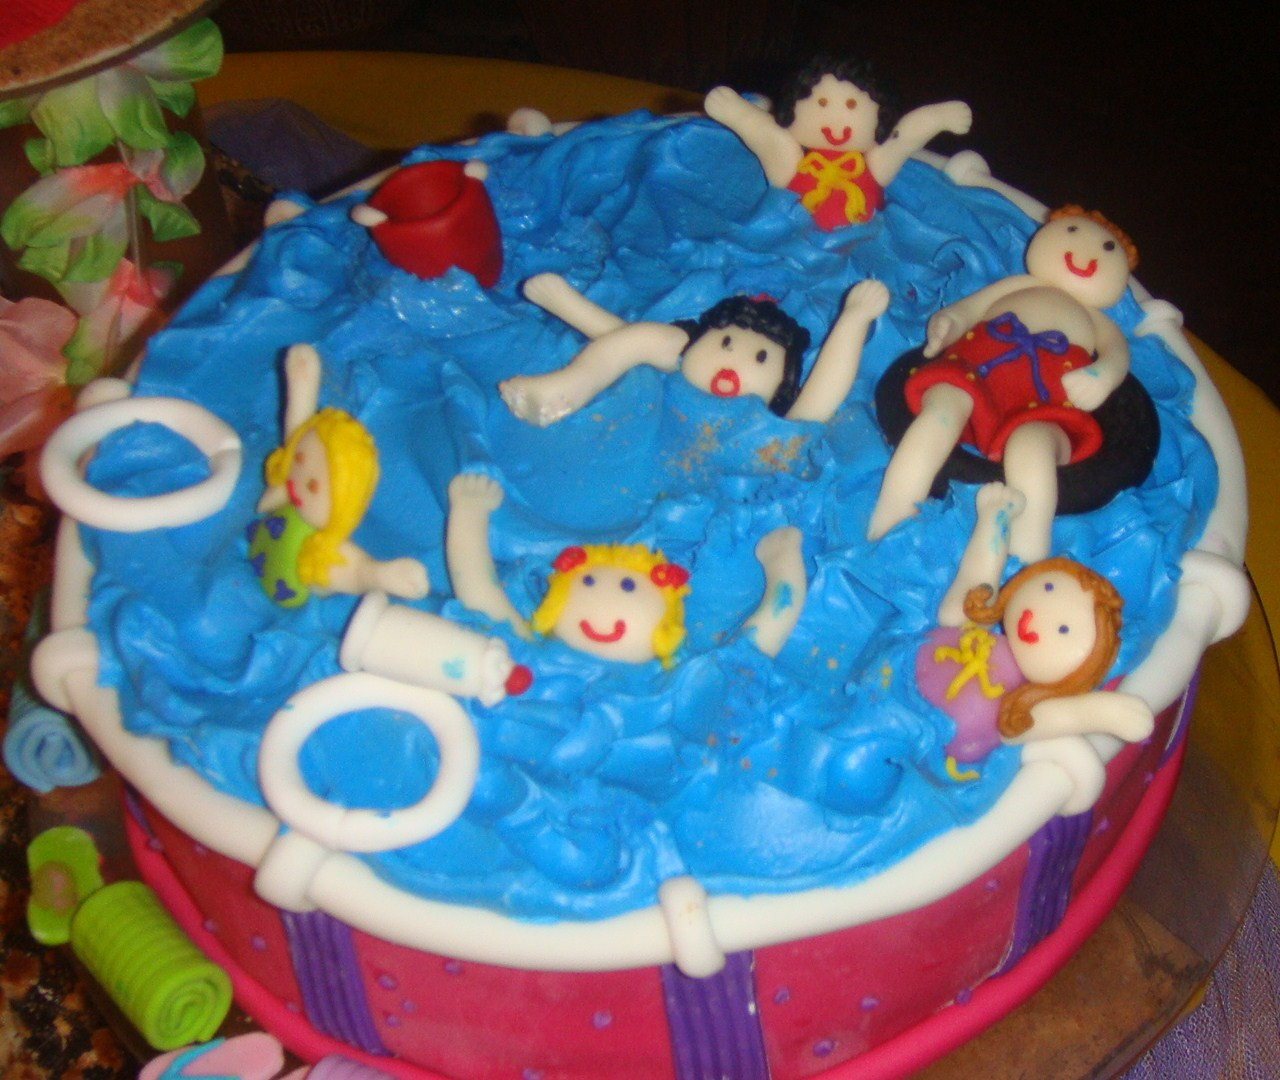 Pool Party Cakes Ideas
 Ideas for a Cool Sunny Pool Party